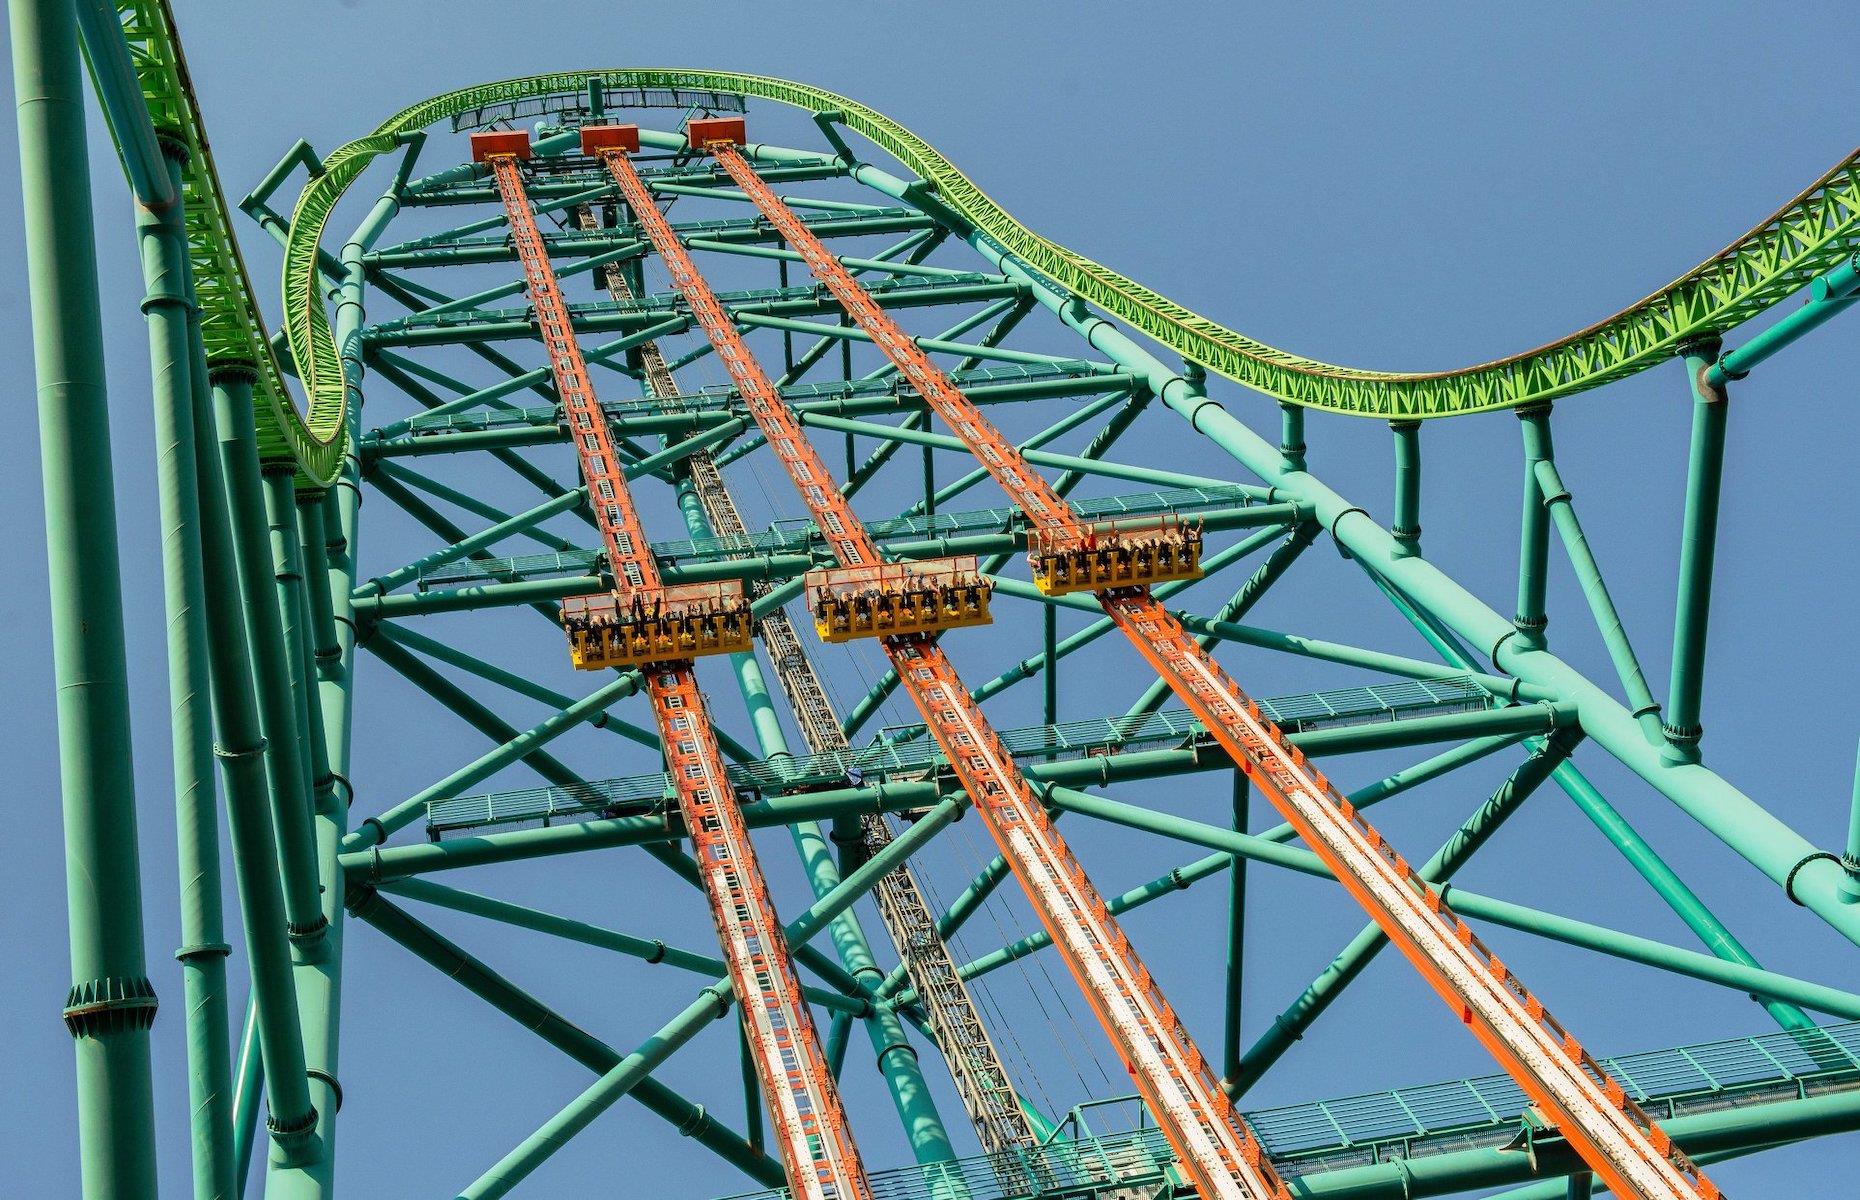 <p><a href="https://www.sixflags.com/greatadventure">Six Flags Great Adventure</a> is home to a record-breaking drop tower, which is attached to the soaring Kingda Ka coaster. The Zumanjaro: Drop of Doom features a trio of free-fall drop attractions and is tipped as both the tallest and fastest drop ride in the world. Riders shoot up to heights of 415 feet (126m) before rushing back down again at 90 miles per hour (145km/h) in less than 10 seconds. Fast but furious indeed.</p>  <p><strong><a href="http://bit.ly/3roL4wv">Love this? Follow our Facebook page for more travel inspiration</a></strong></p>